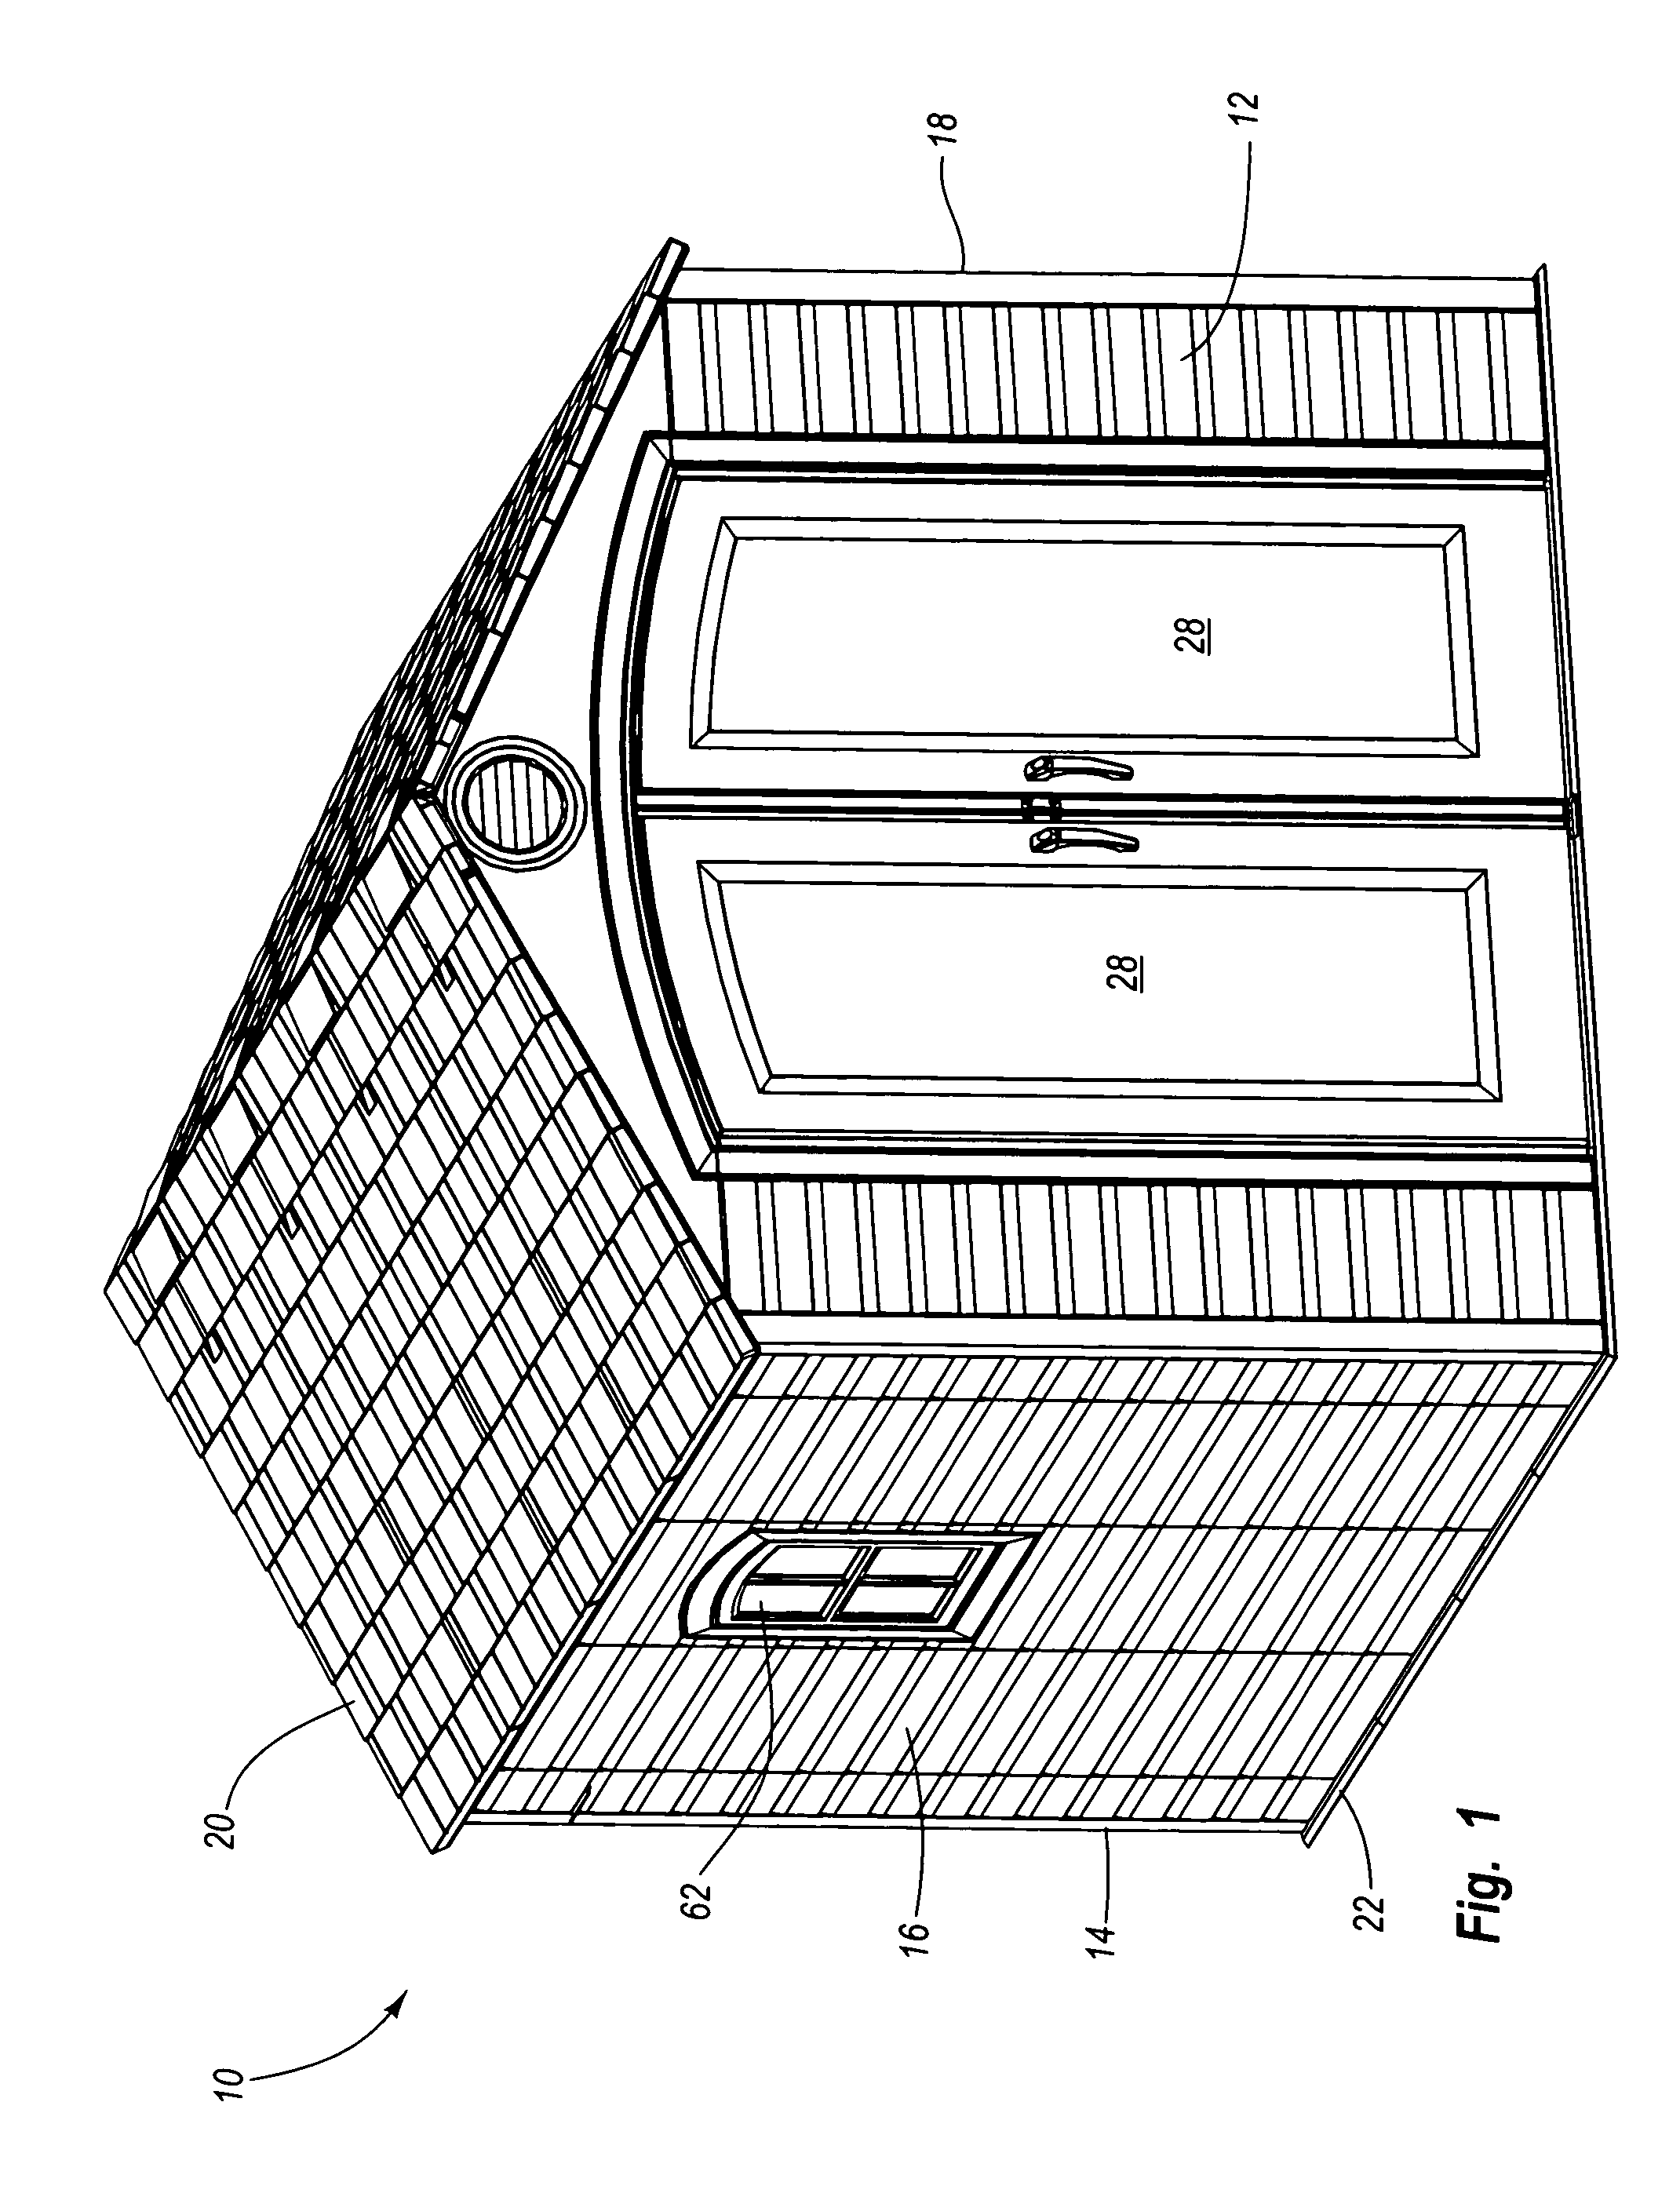 Roof system for a modular enclosure